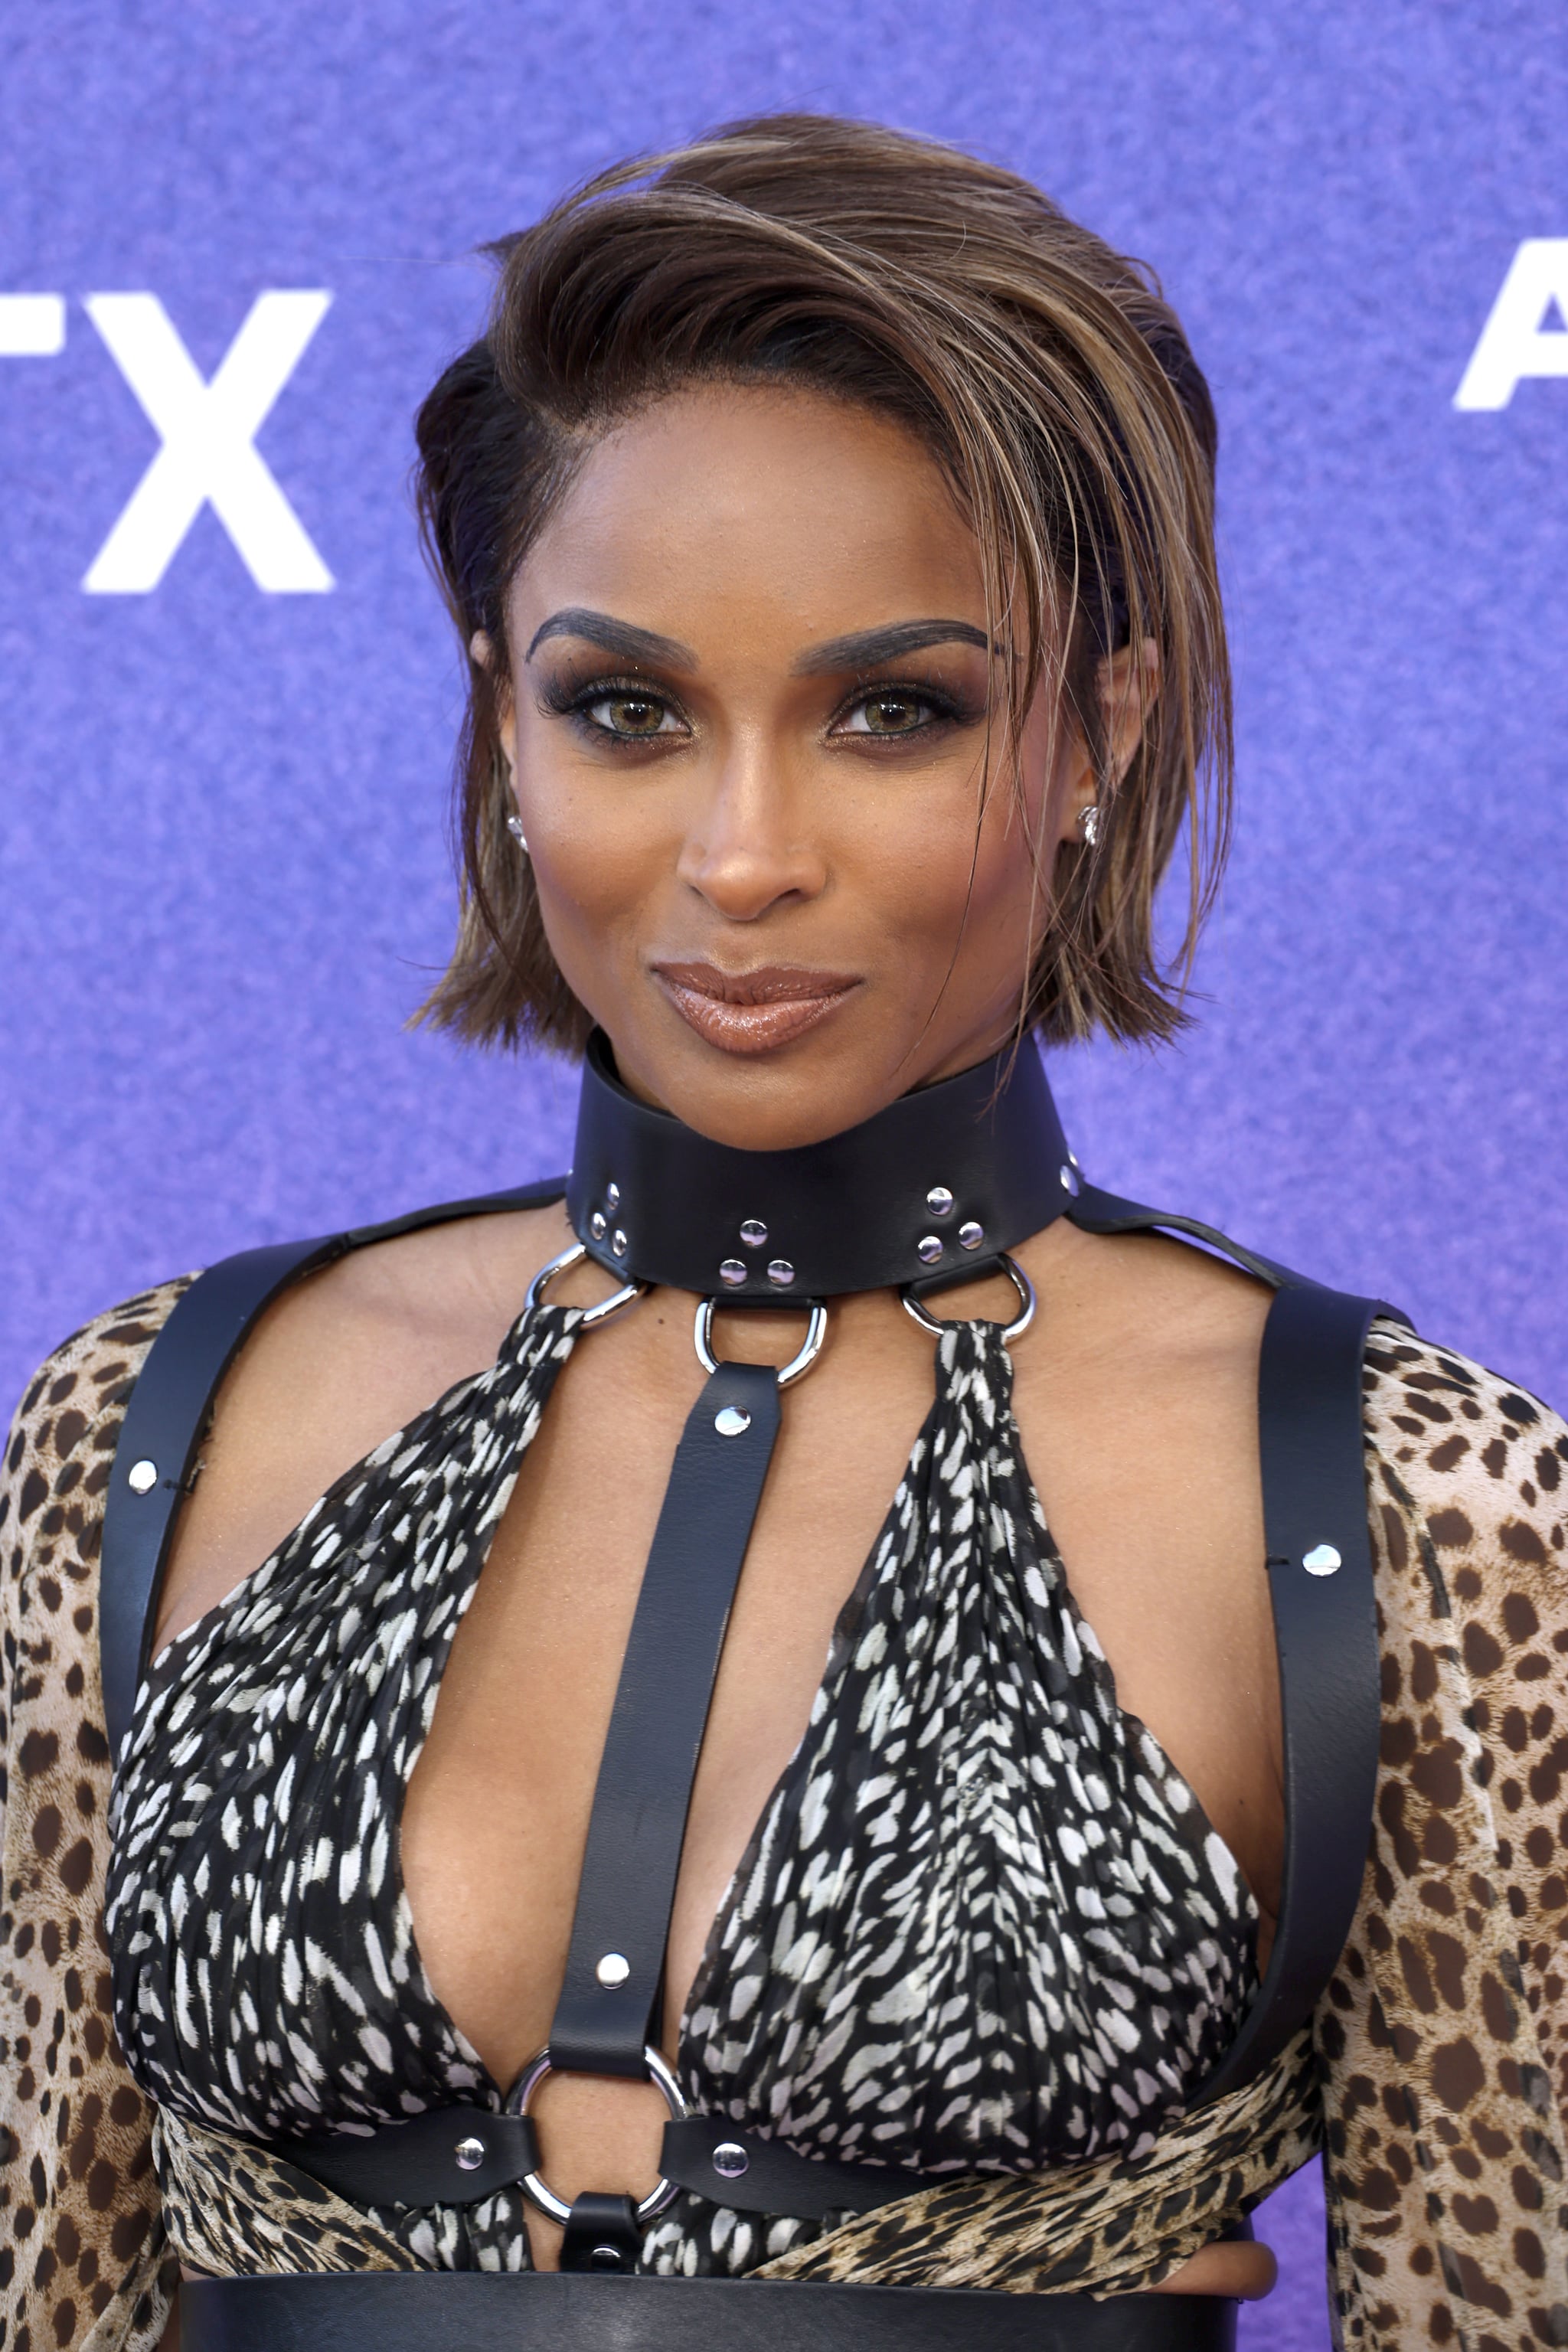 INGLEWOOD, CALIFORNIA - MARCH 02: Ciara attends Billboard Women in Music at YouTube Theatre on March 02, 2022 in Inglewood, California. (Photo by Frazer Harrison/Getty Images)